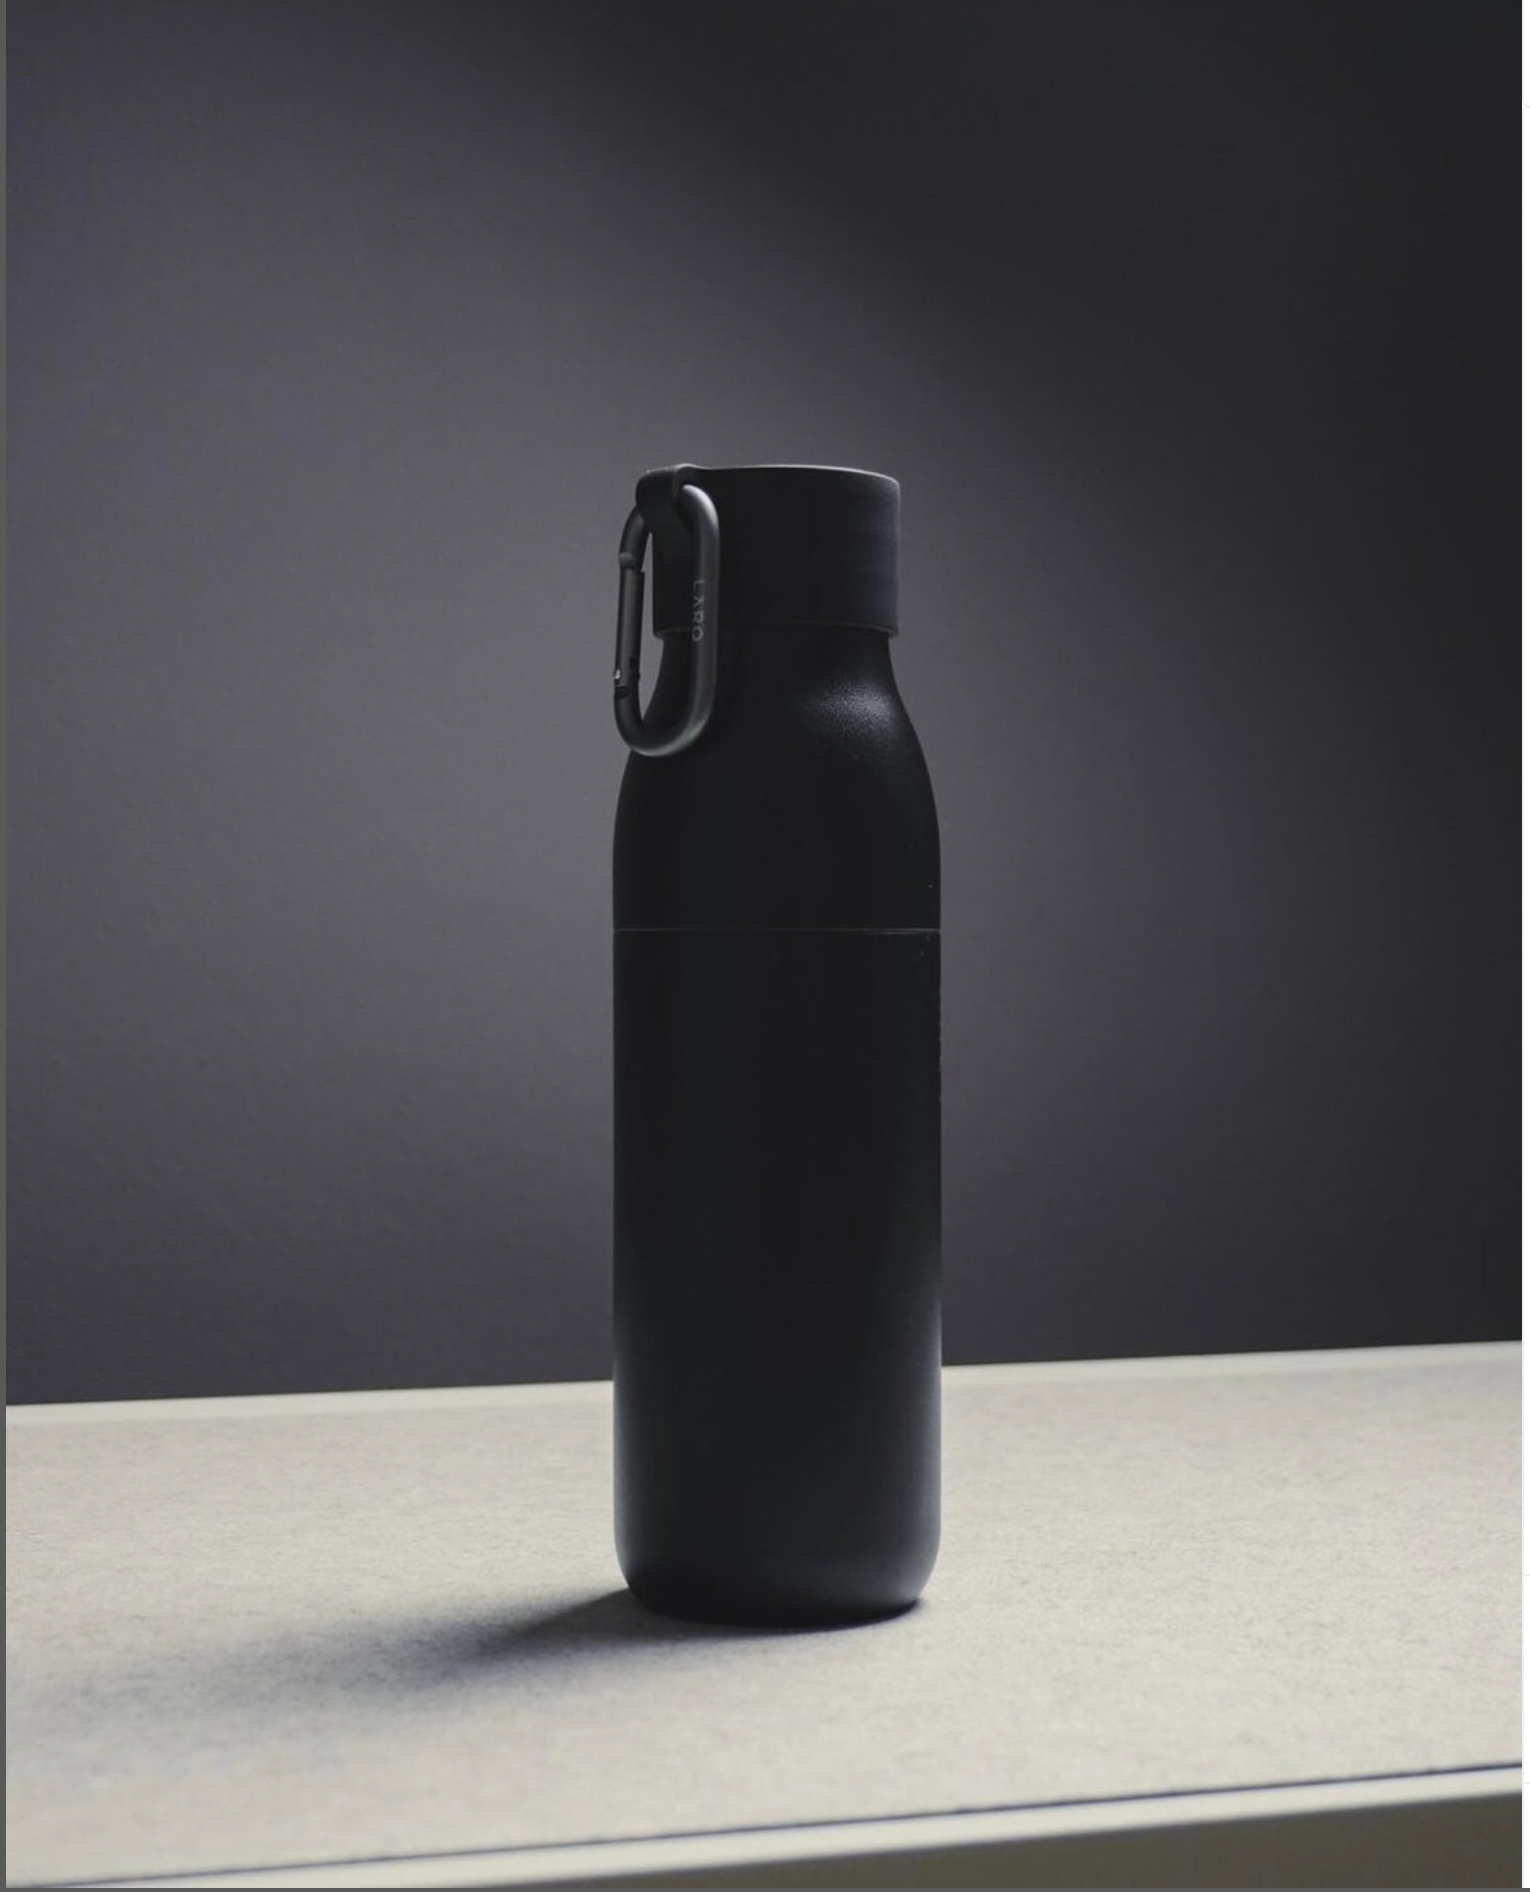 Black insulated water bottle with a carabiner attached to its lid, positioned on a table against a gray background, next to massage guns.